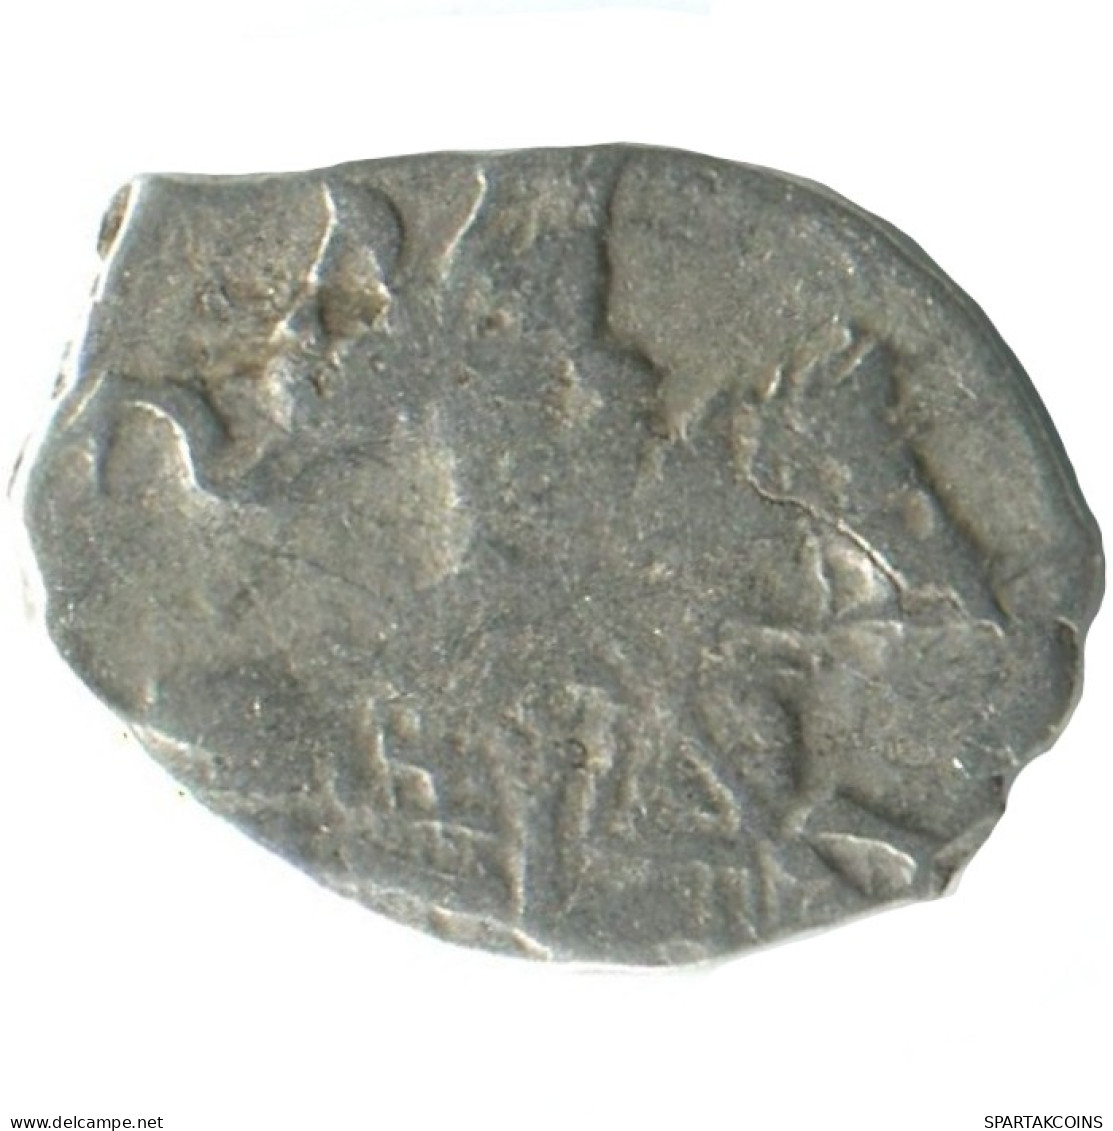 RUSSIE RUSSIA 1702 KOPECK PETER I KADASHEVSKY Mint MOSCOW ARGENT 0.3g/11mm #AB539.10.F.A - Russia